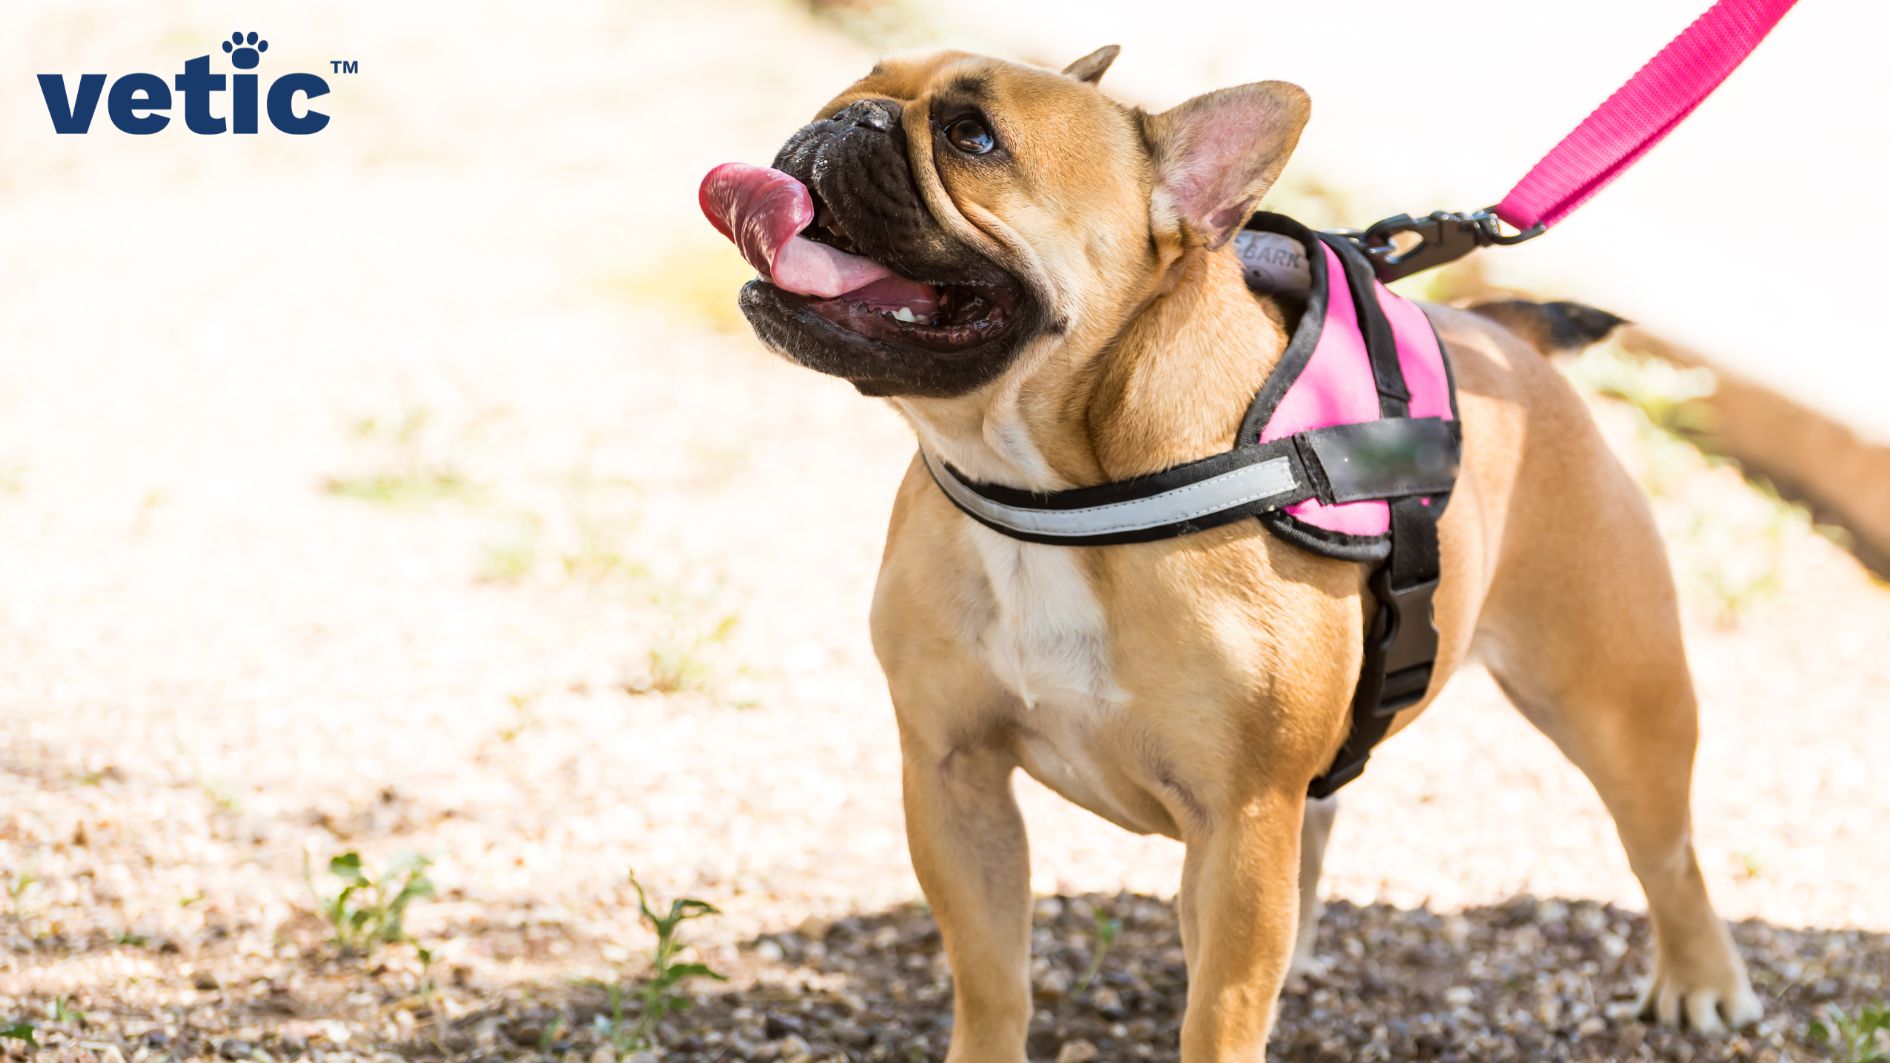 a Boston Terrier wearing a pink padded harness with a fuchsia pink leash. padded harnesses are must-have dog accessories for all breeds and sizes